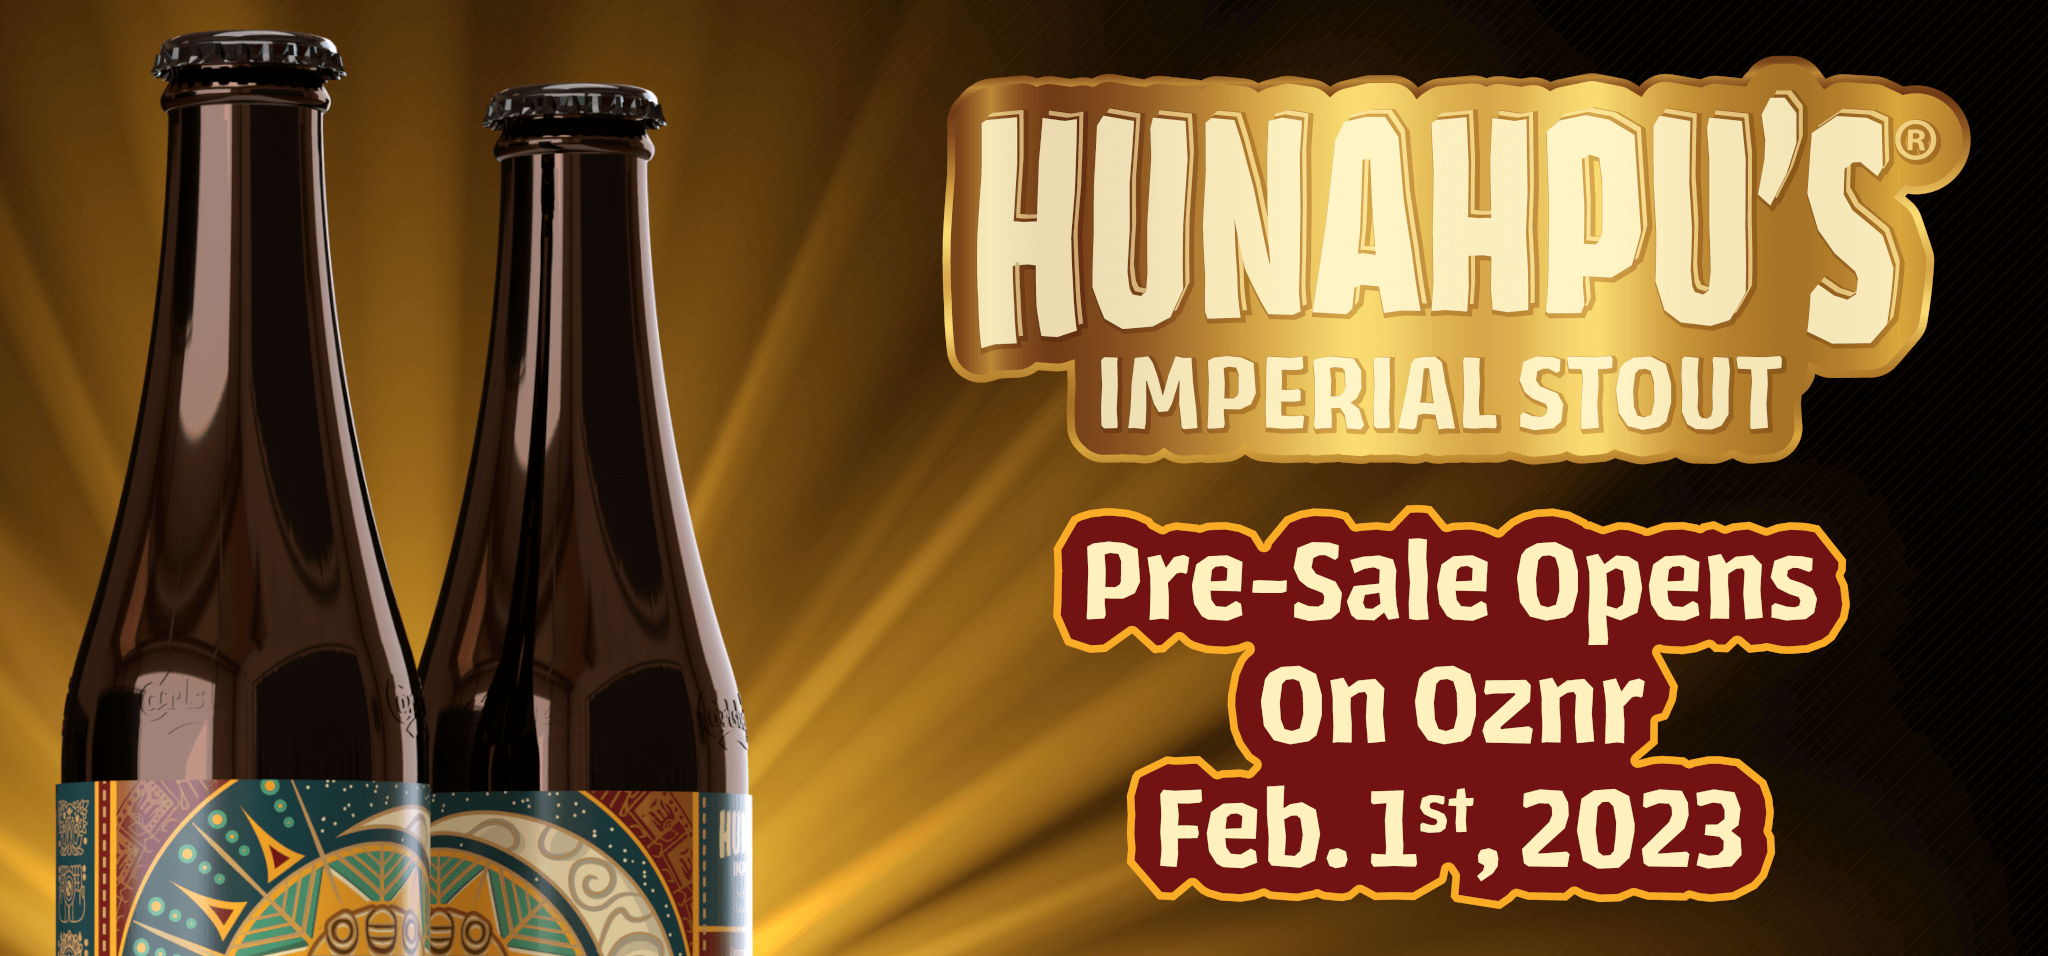 Cigar City Brewing's Hunahpu's Imperial Stout and its 2023 variant go on sale to the public starting February 1, 2023 through the Oznr app.